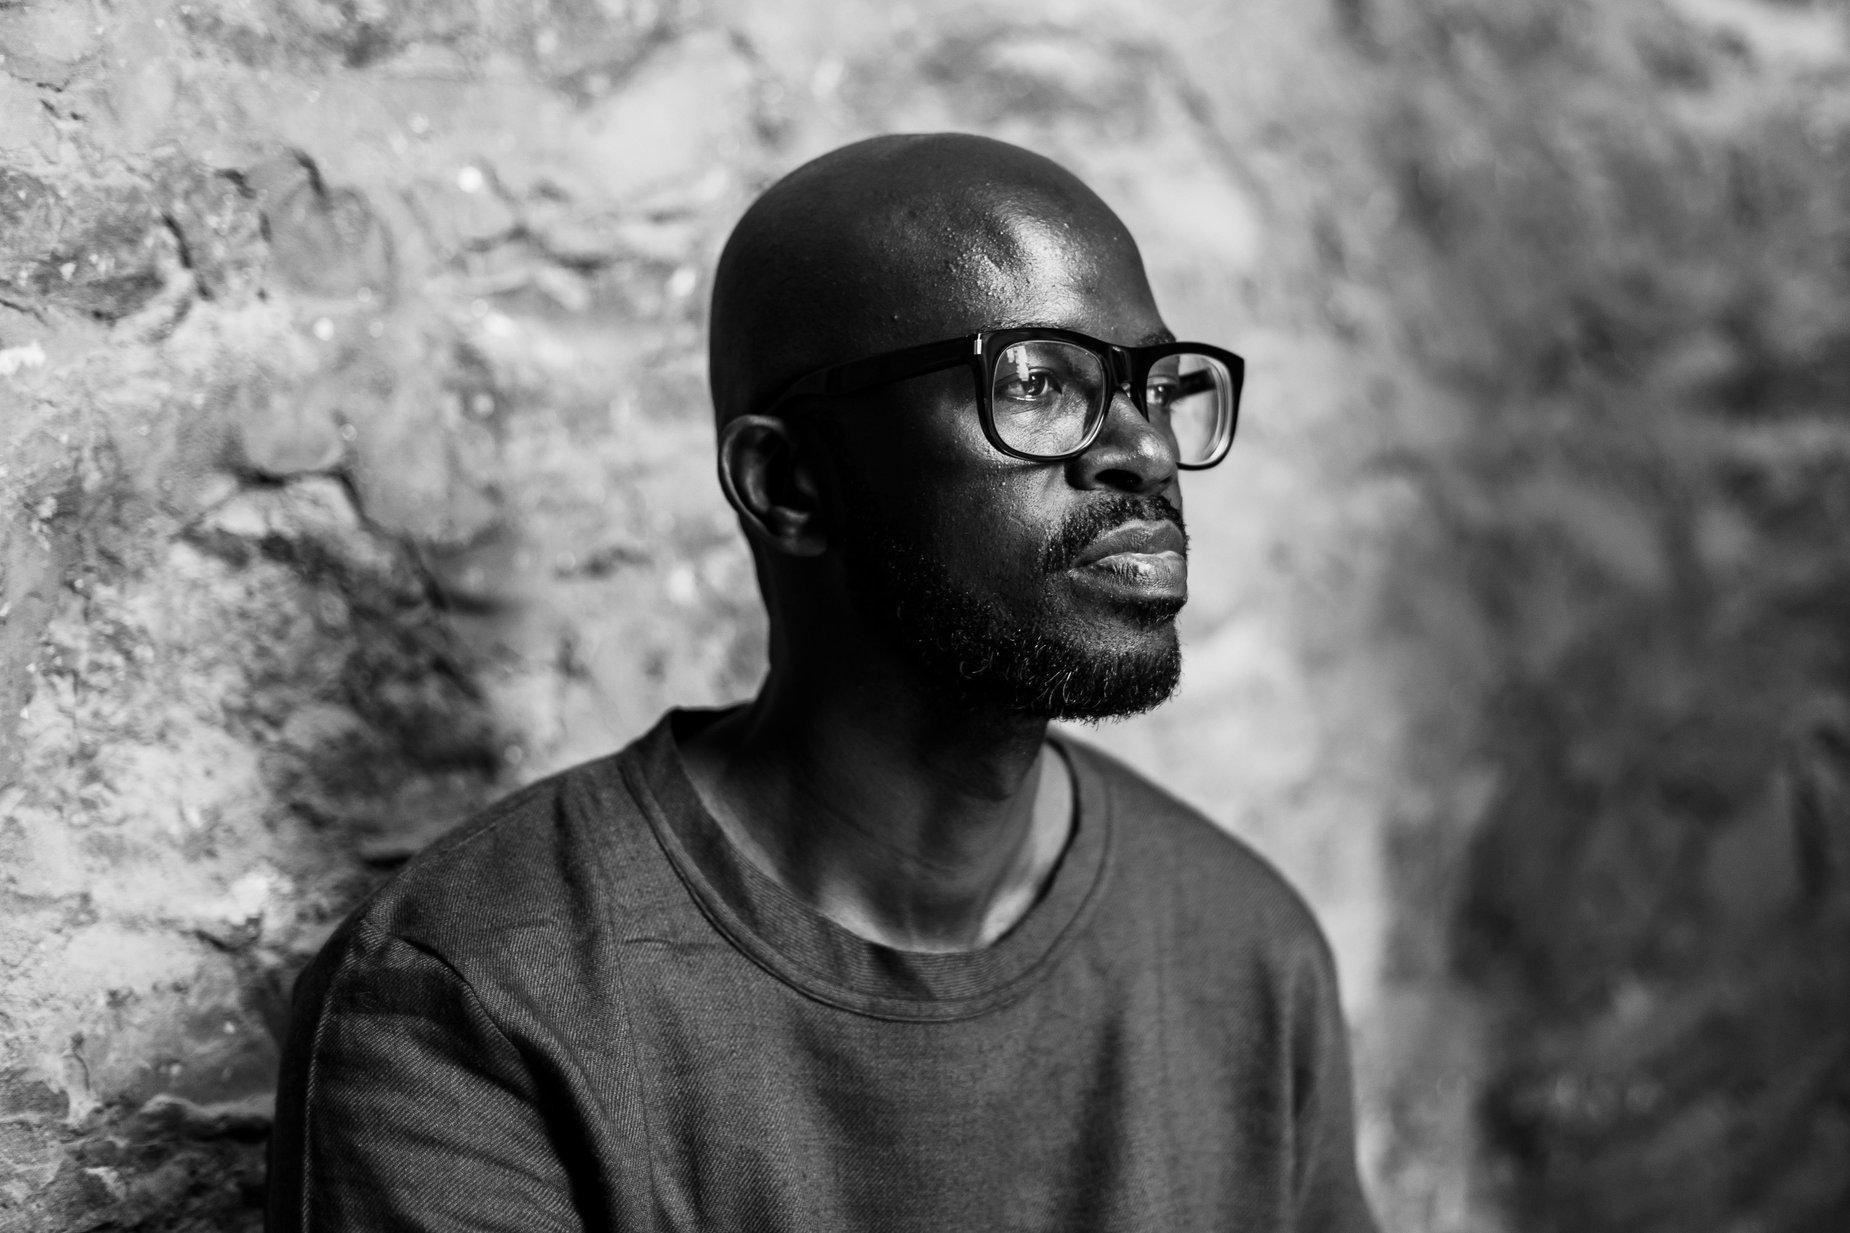 Gongbox from Black Coffee is realer than ever before